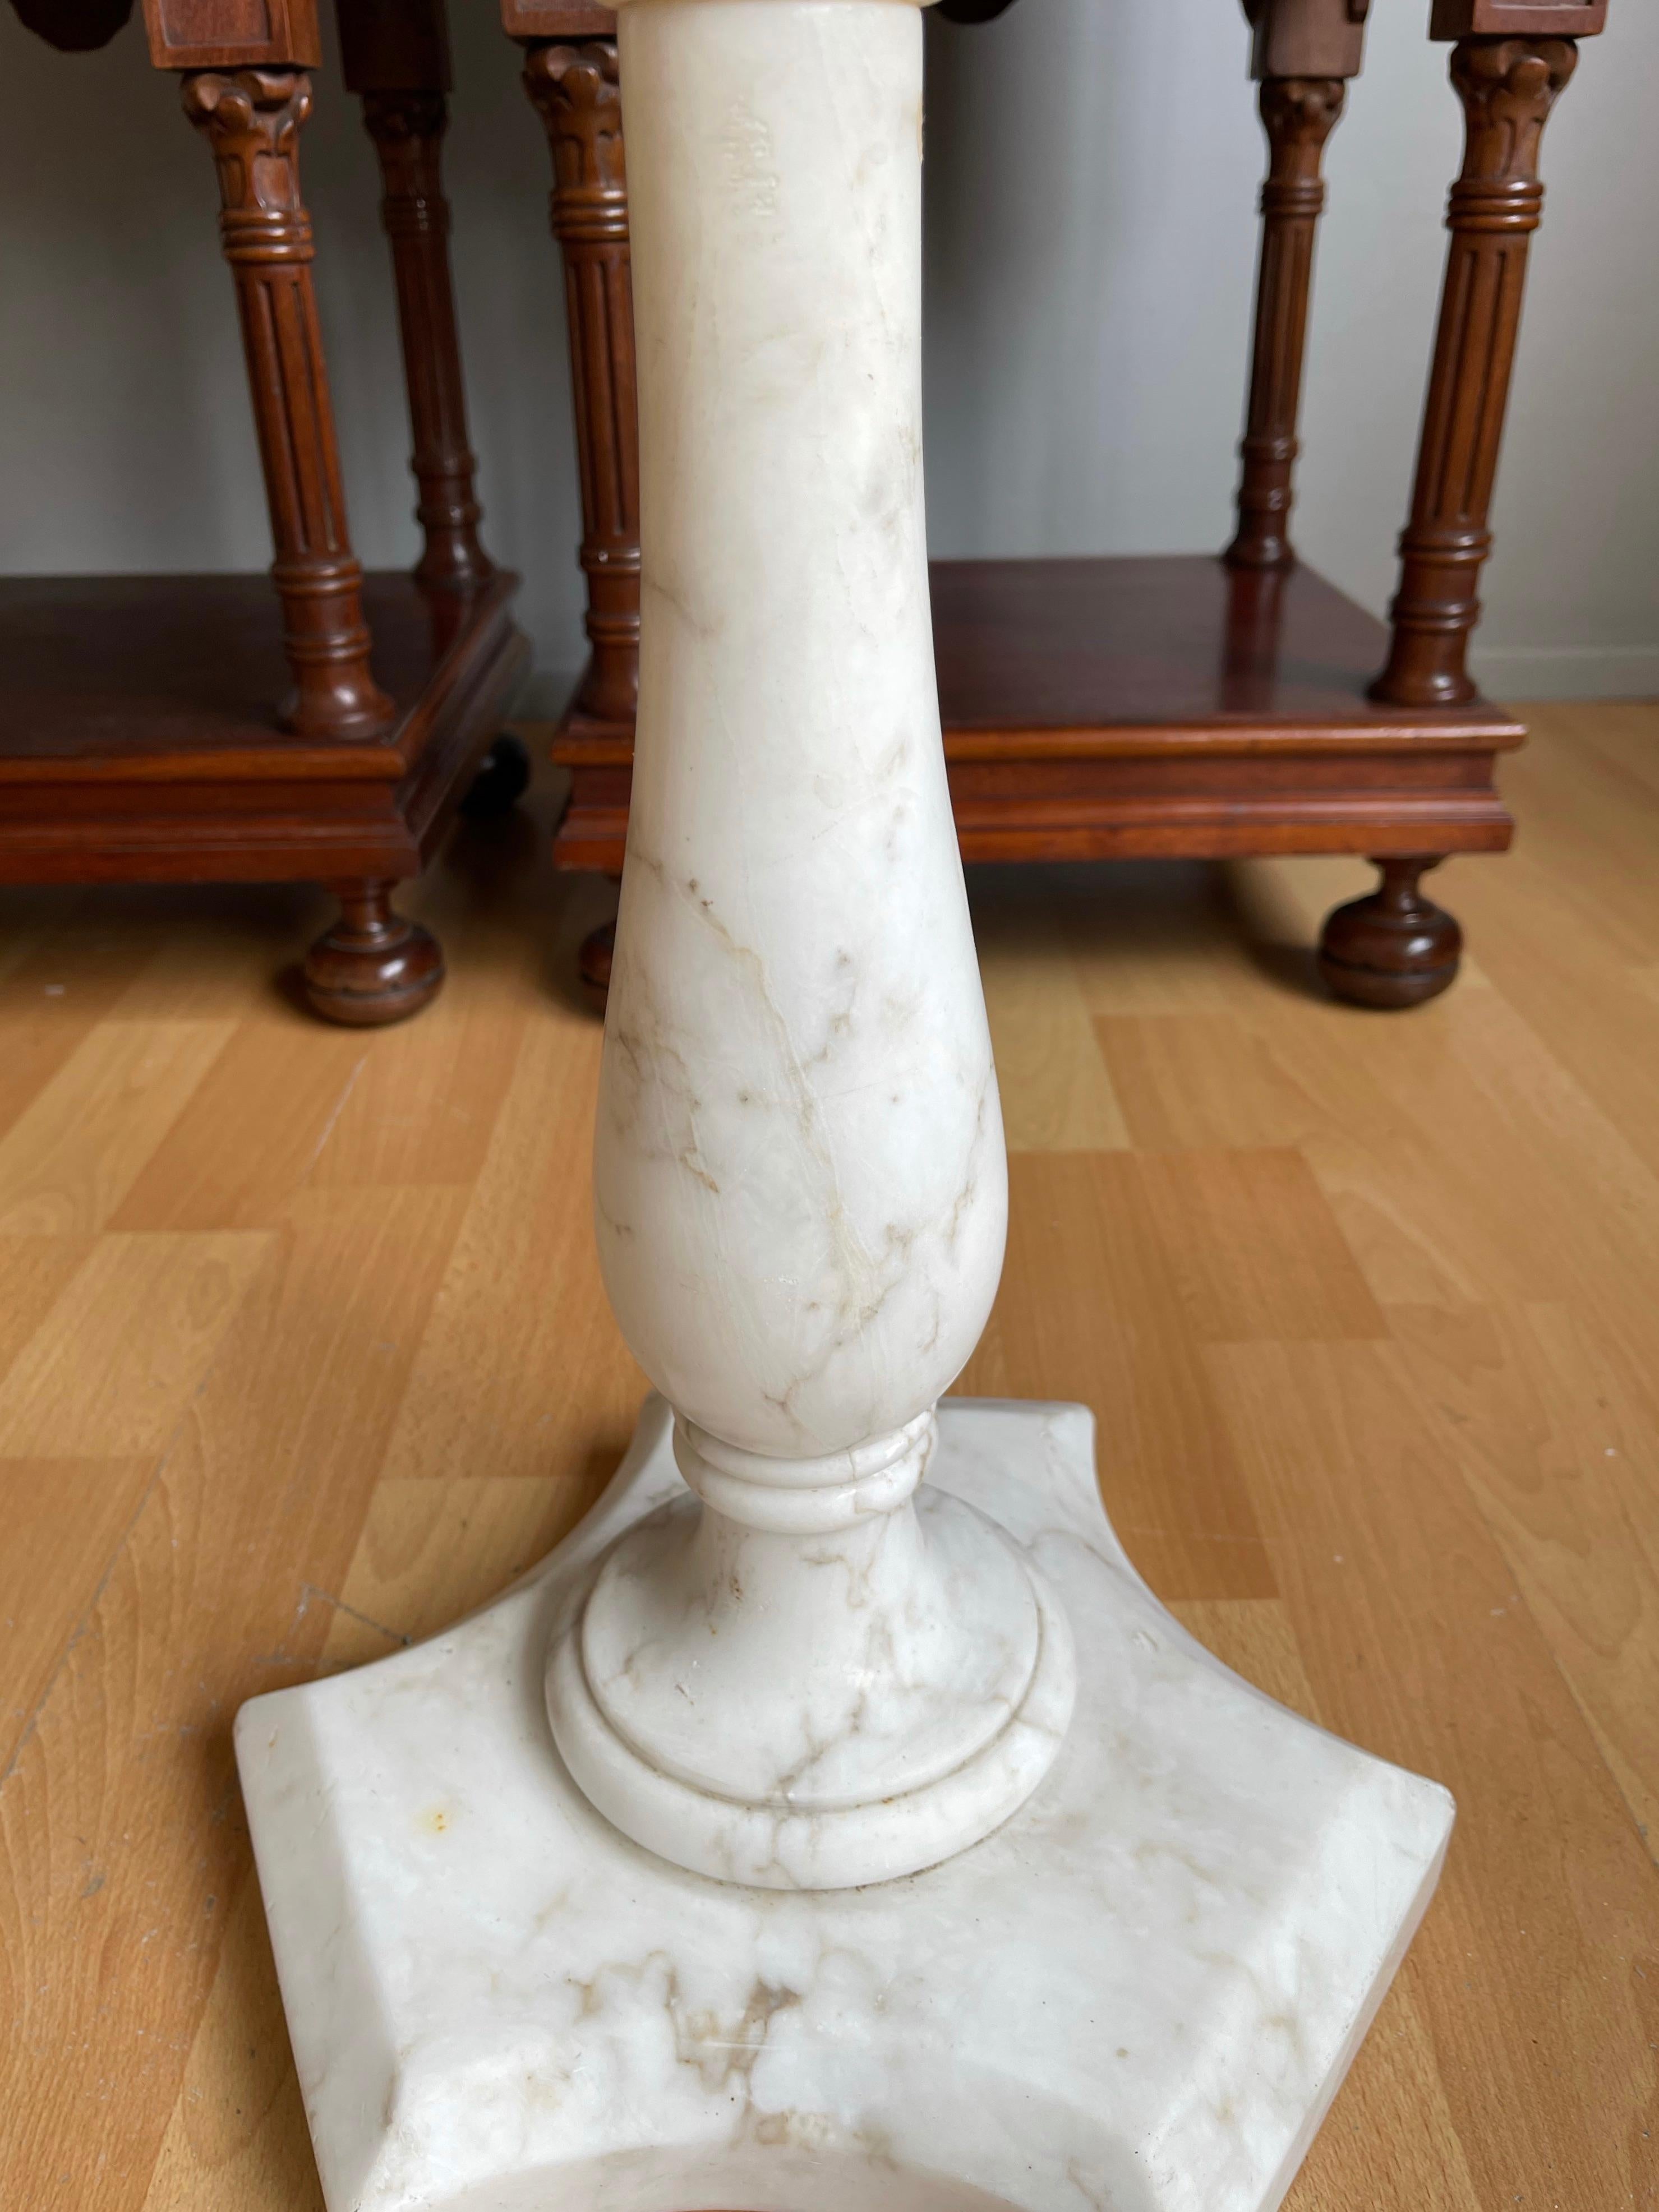 Italian Design Midcentury Modern White Carrara Marble Pedestal Stand / End Table For Sale 8